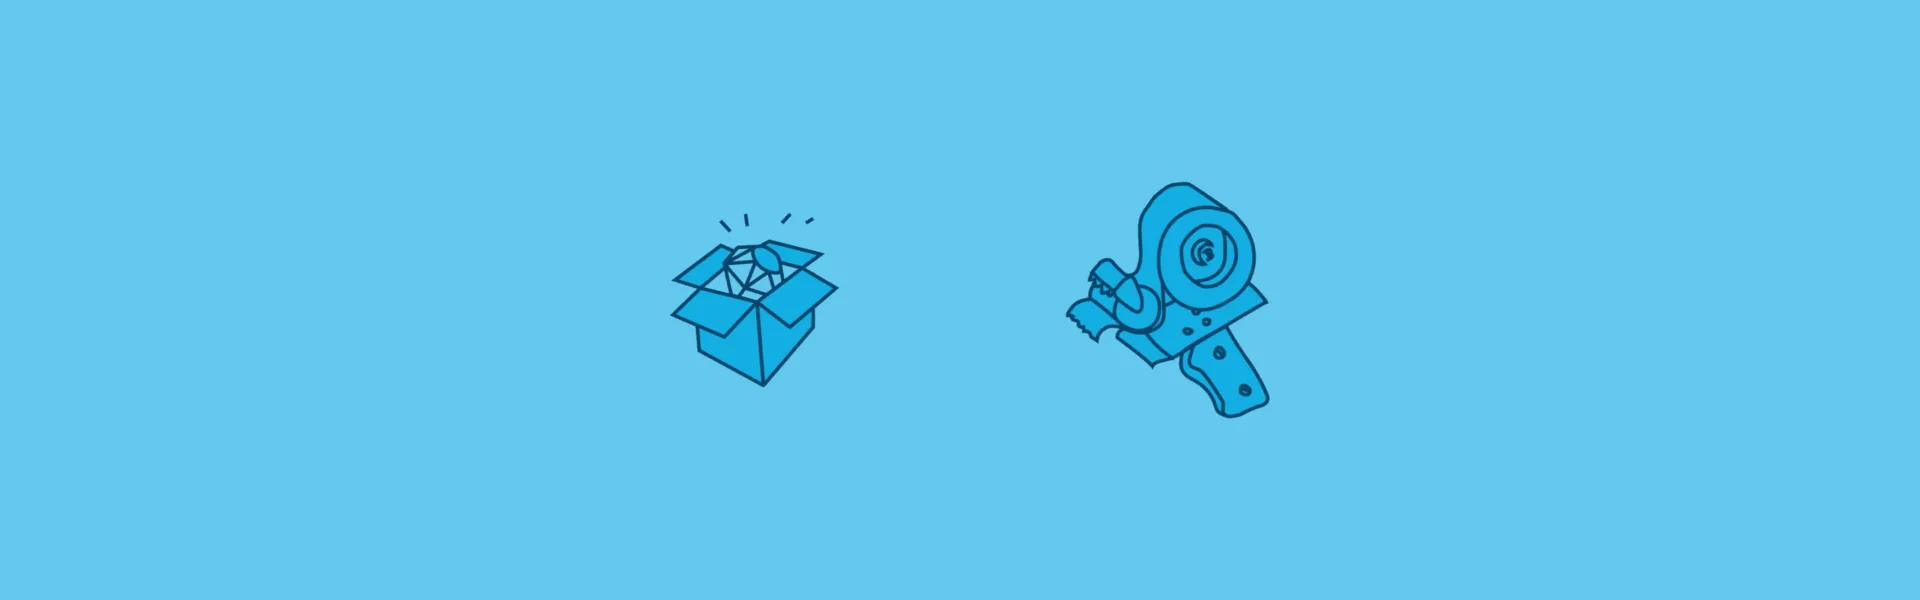 Two illustrations from the Bundler website. One signifies installing a Ruby gem and the other Bundler itself.